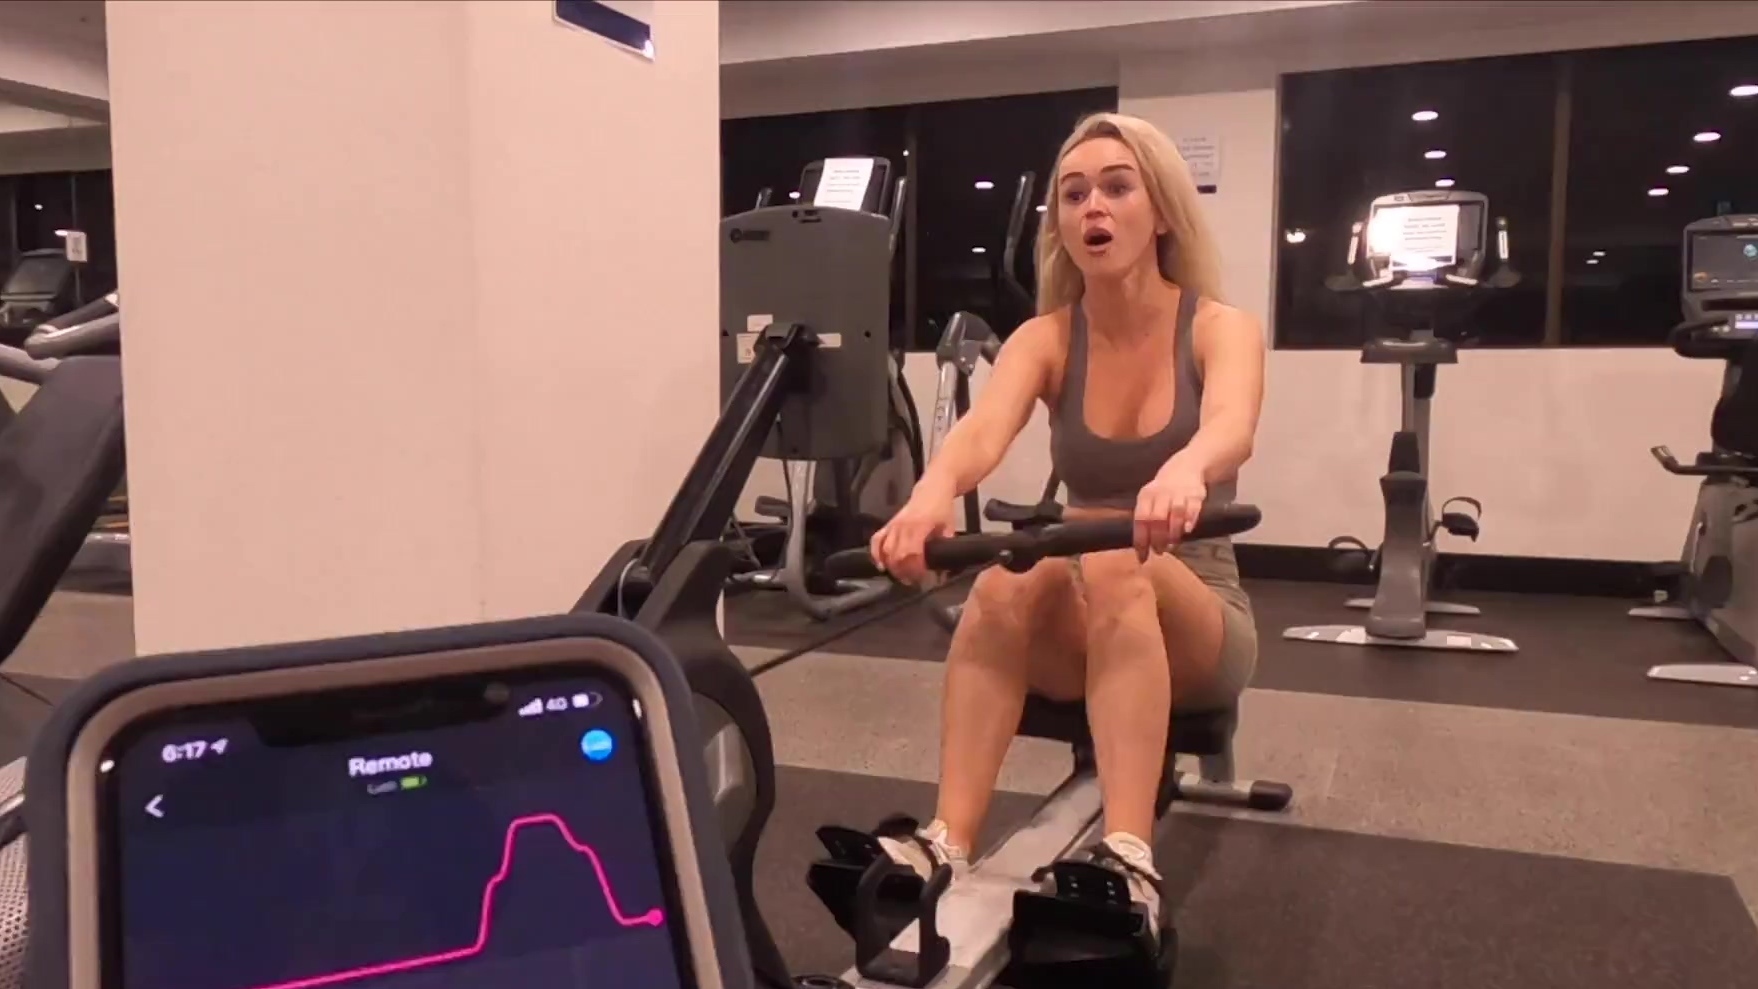 Large Vibrator In Pussy - Hidden vibrator in her pussy and work out at gym